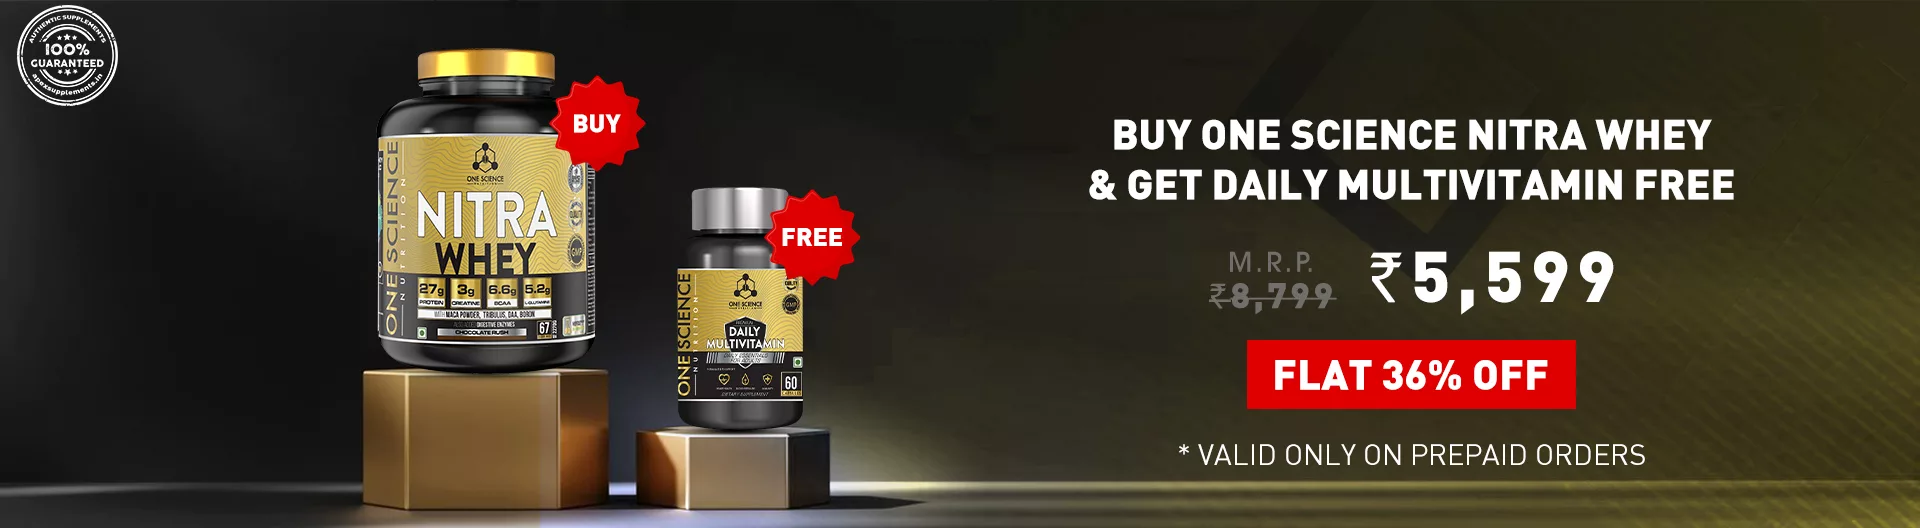 One Science Nitra Whey Combo Offer